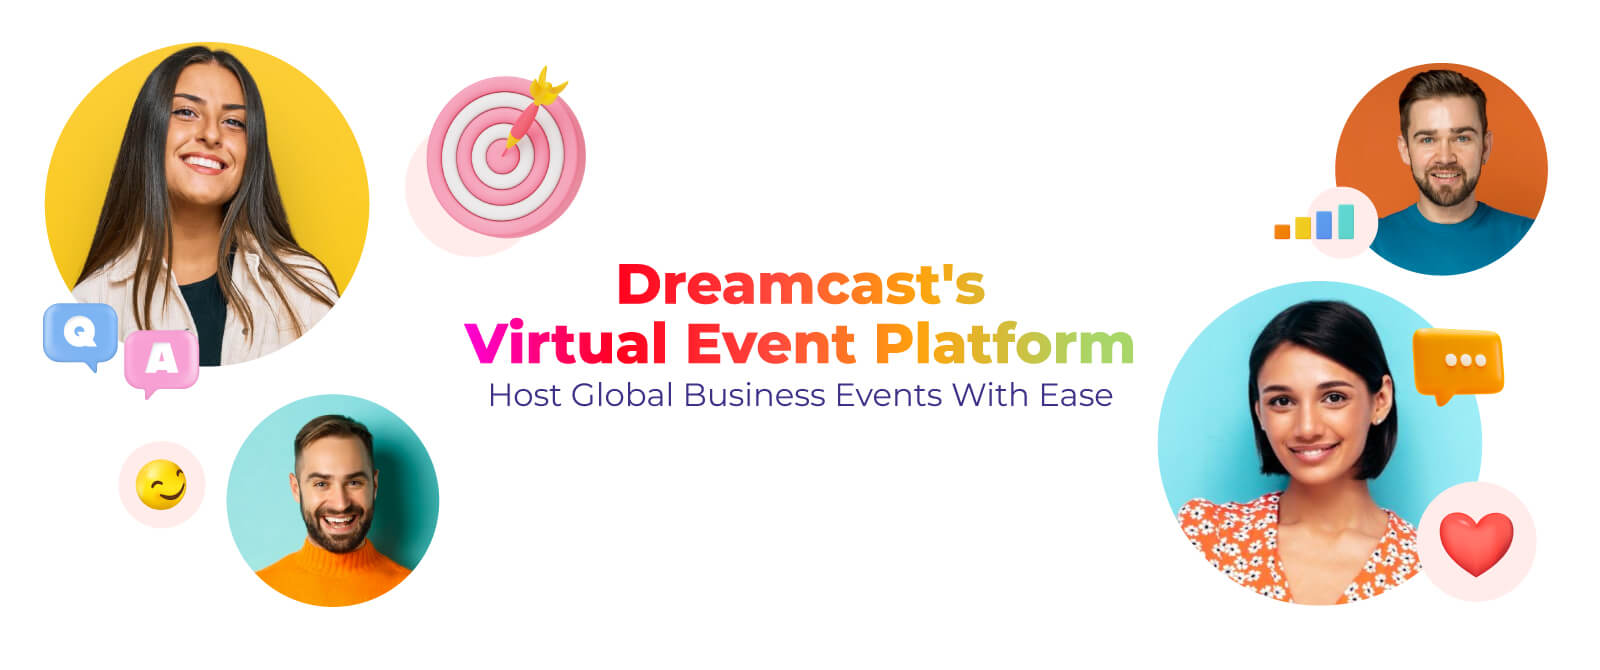 Dreamcast’s Virtual Event Platform: Host Global Business Events With Ease